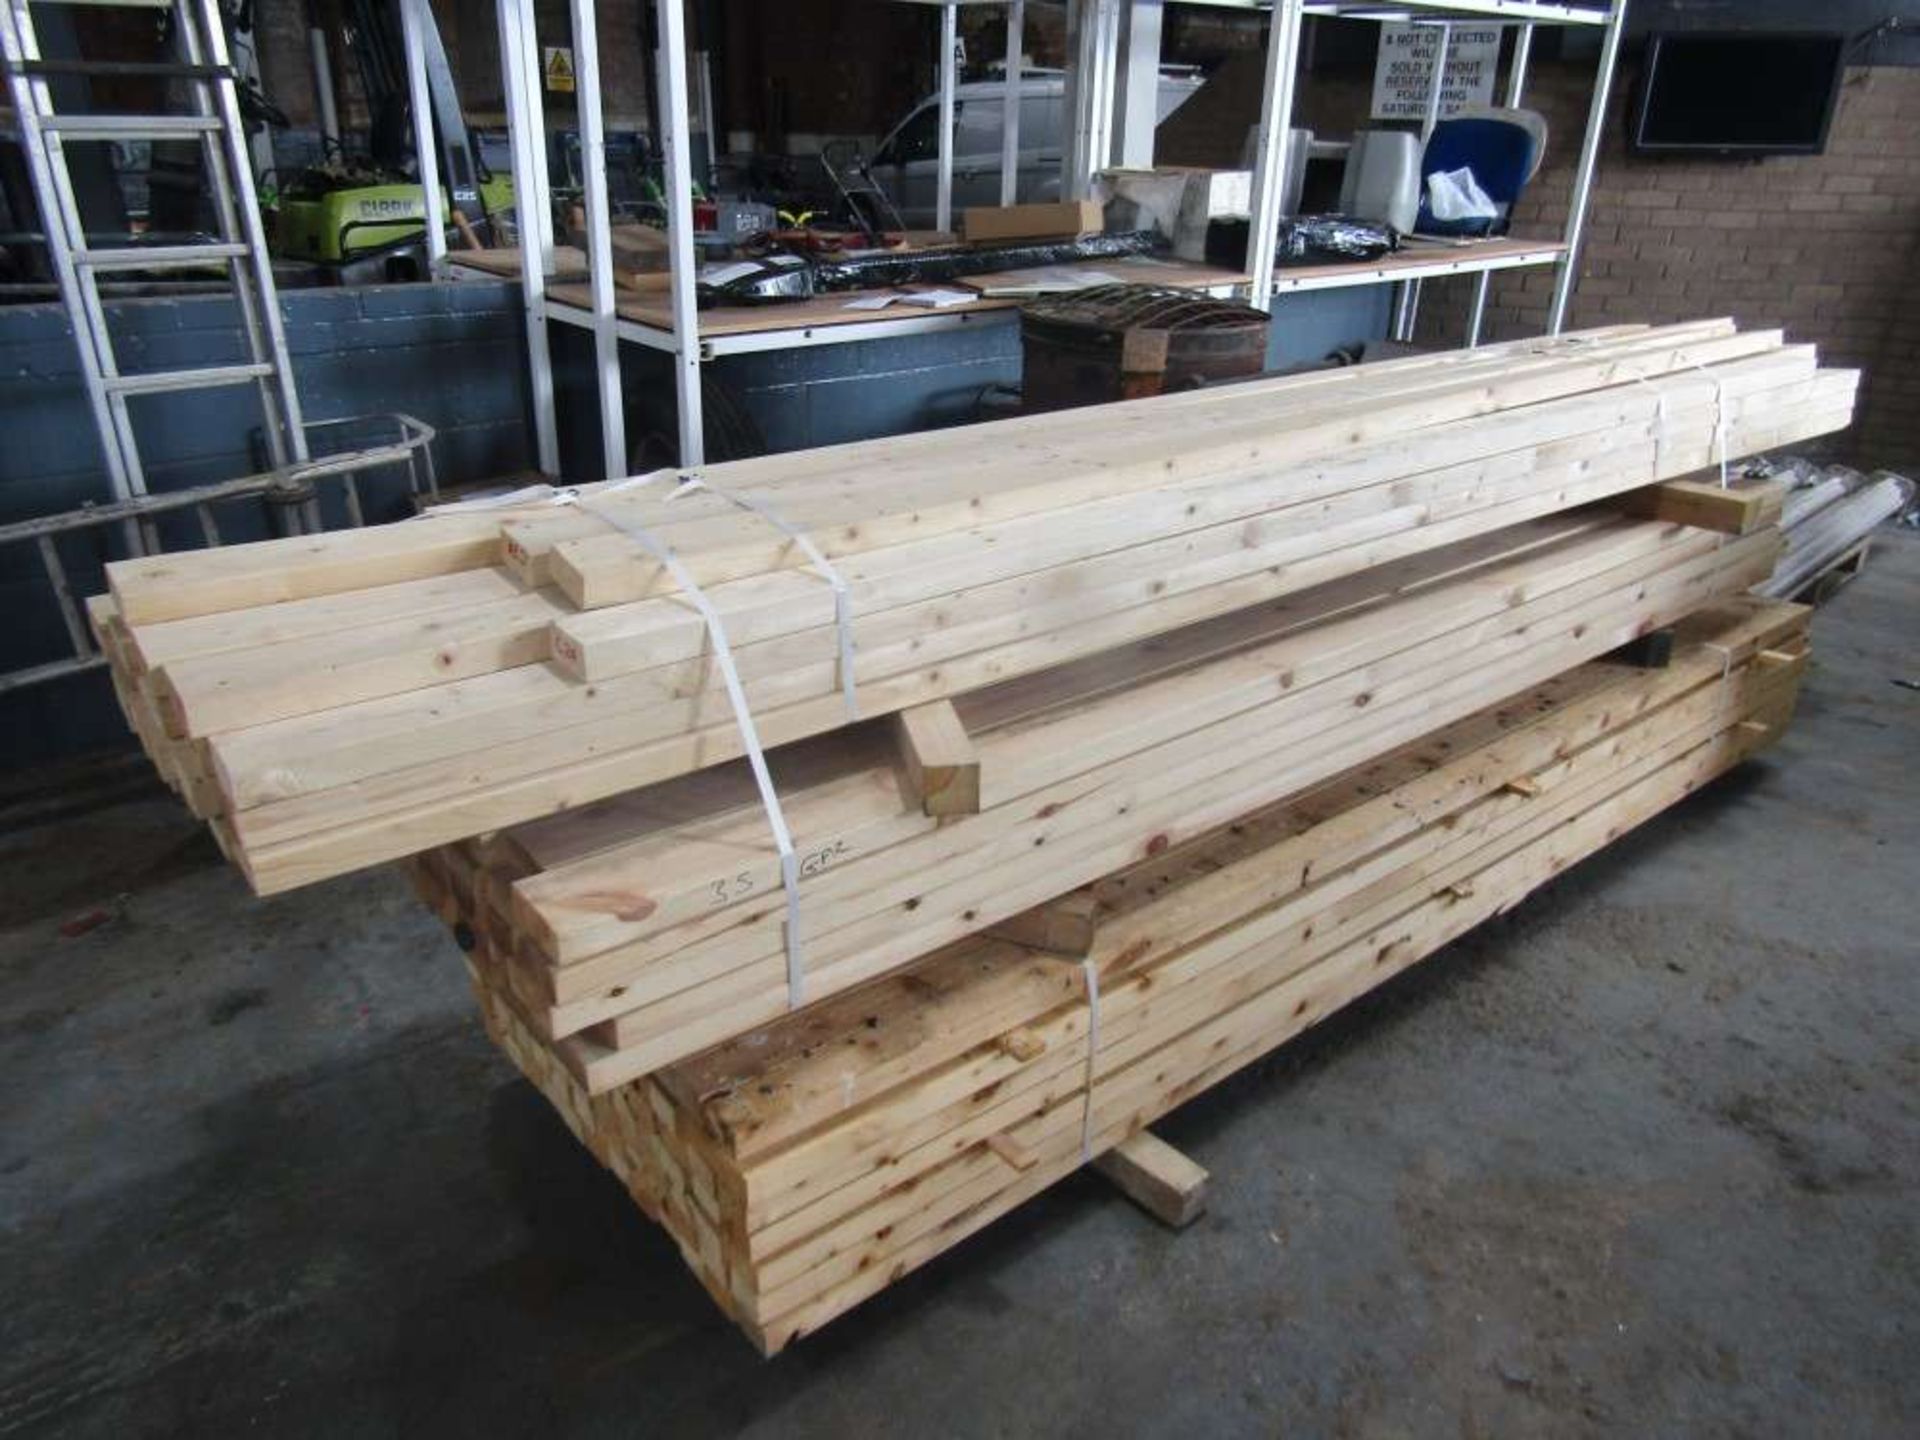 Pack of each 3" x 2", 4" x 2", 5" x 2" Timber